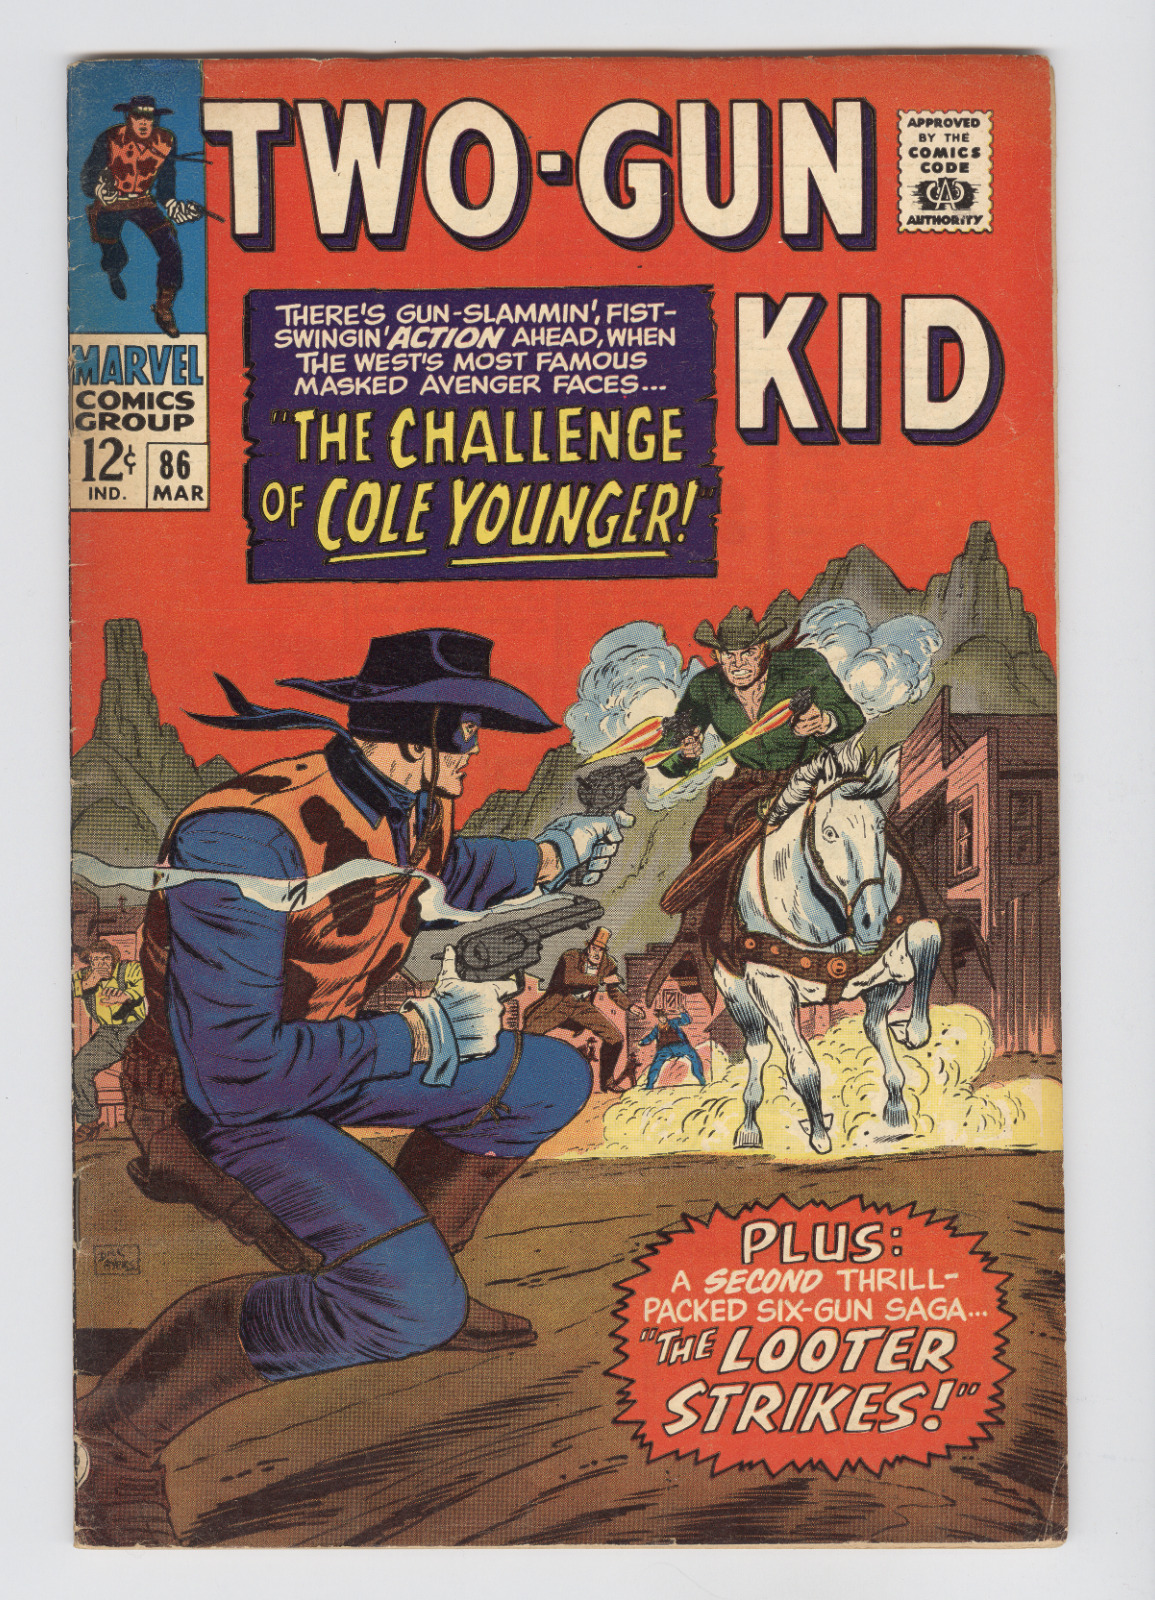 Two-Gun Kid #86 March 1967 VG+ Cole Younger